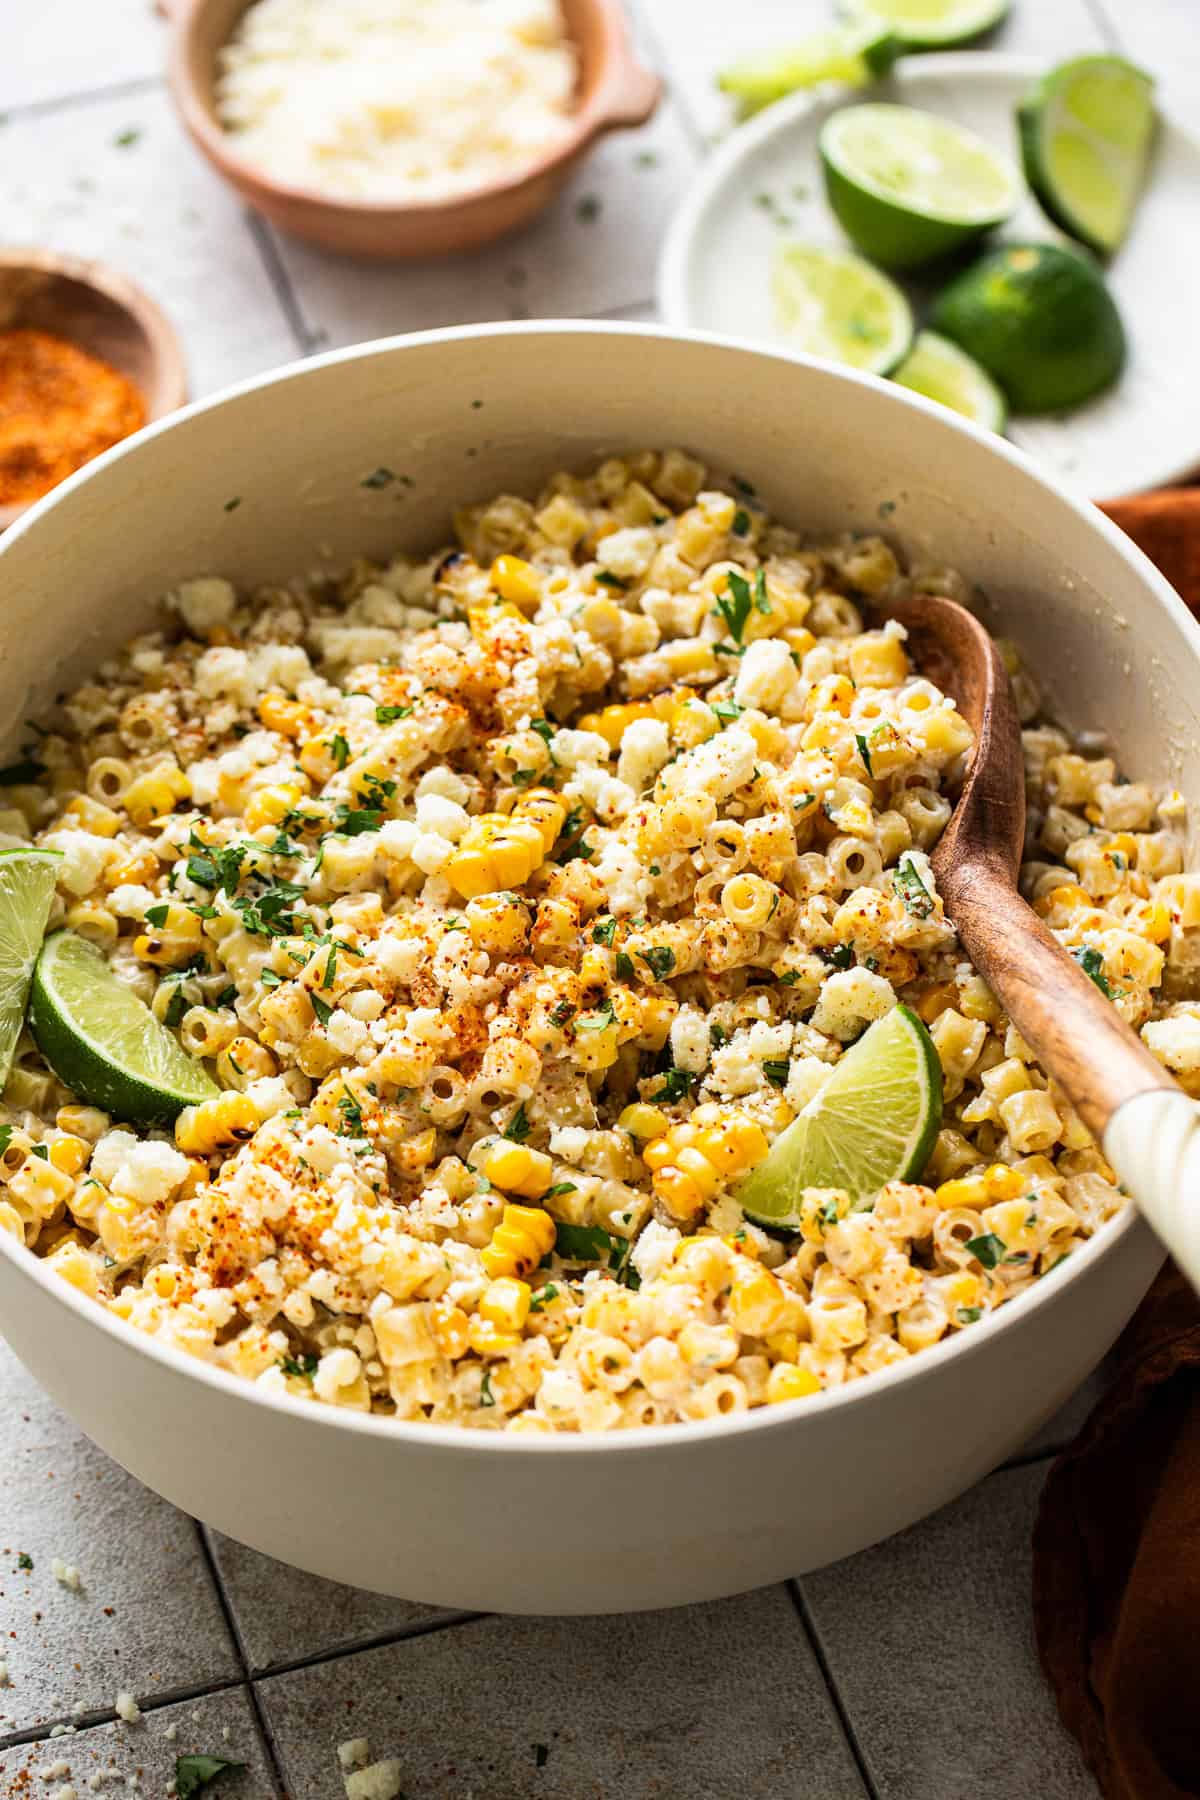 Mexican street corn pasta salad garnished with cilantro, cotija cheese, and fresh limes.